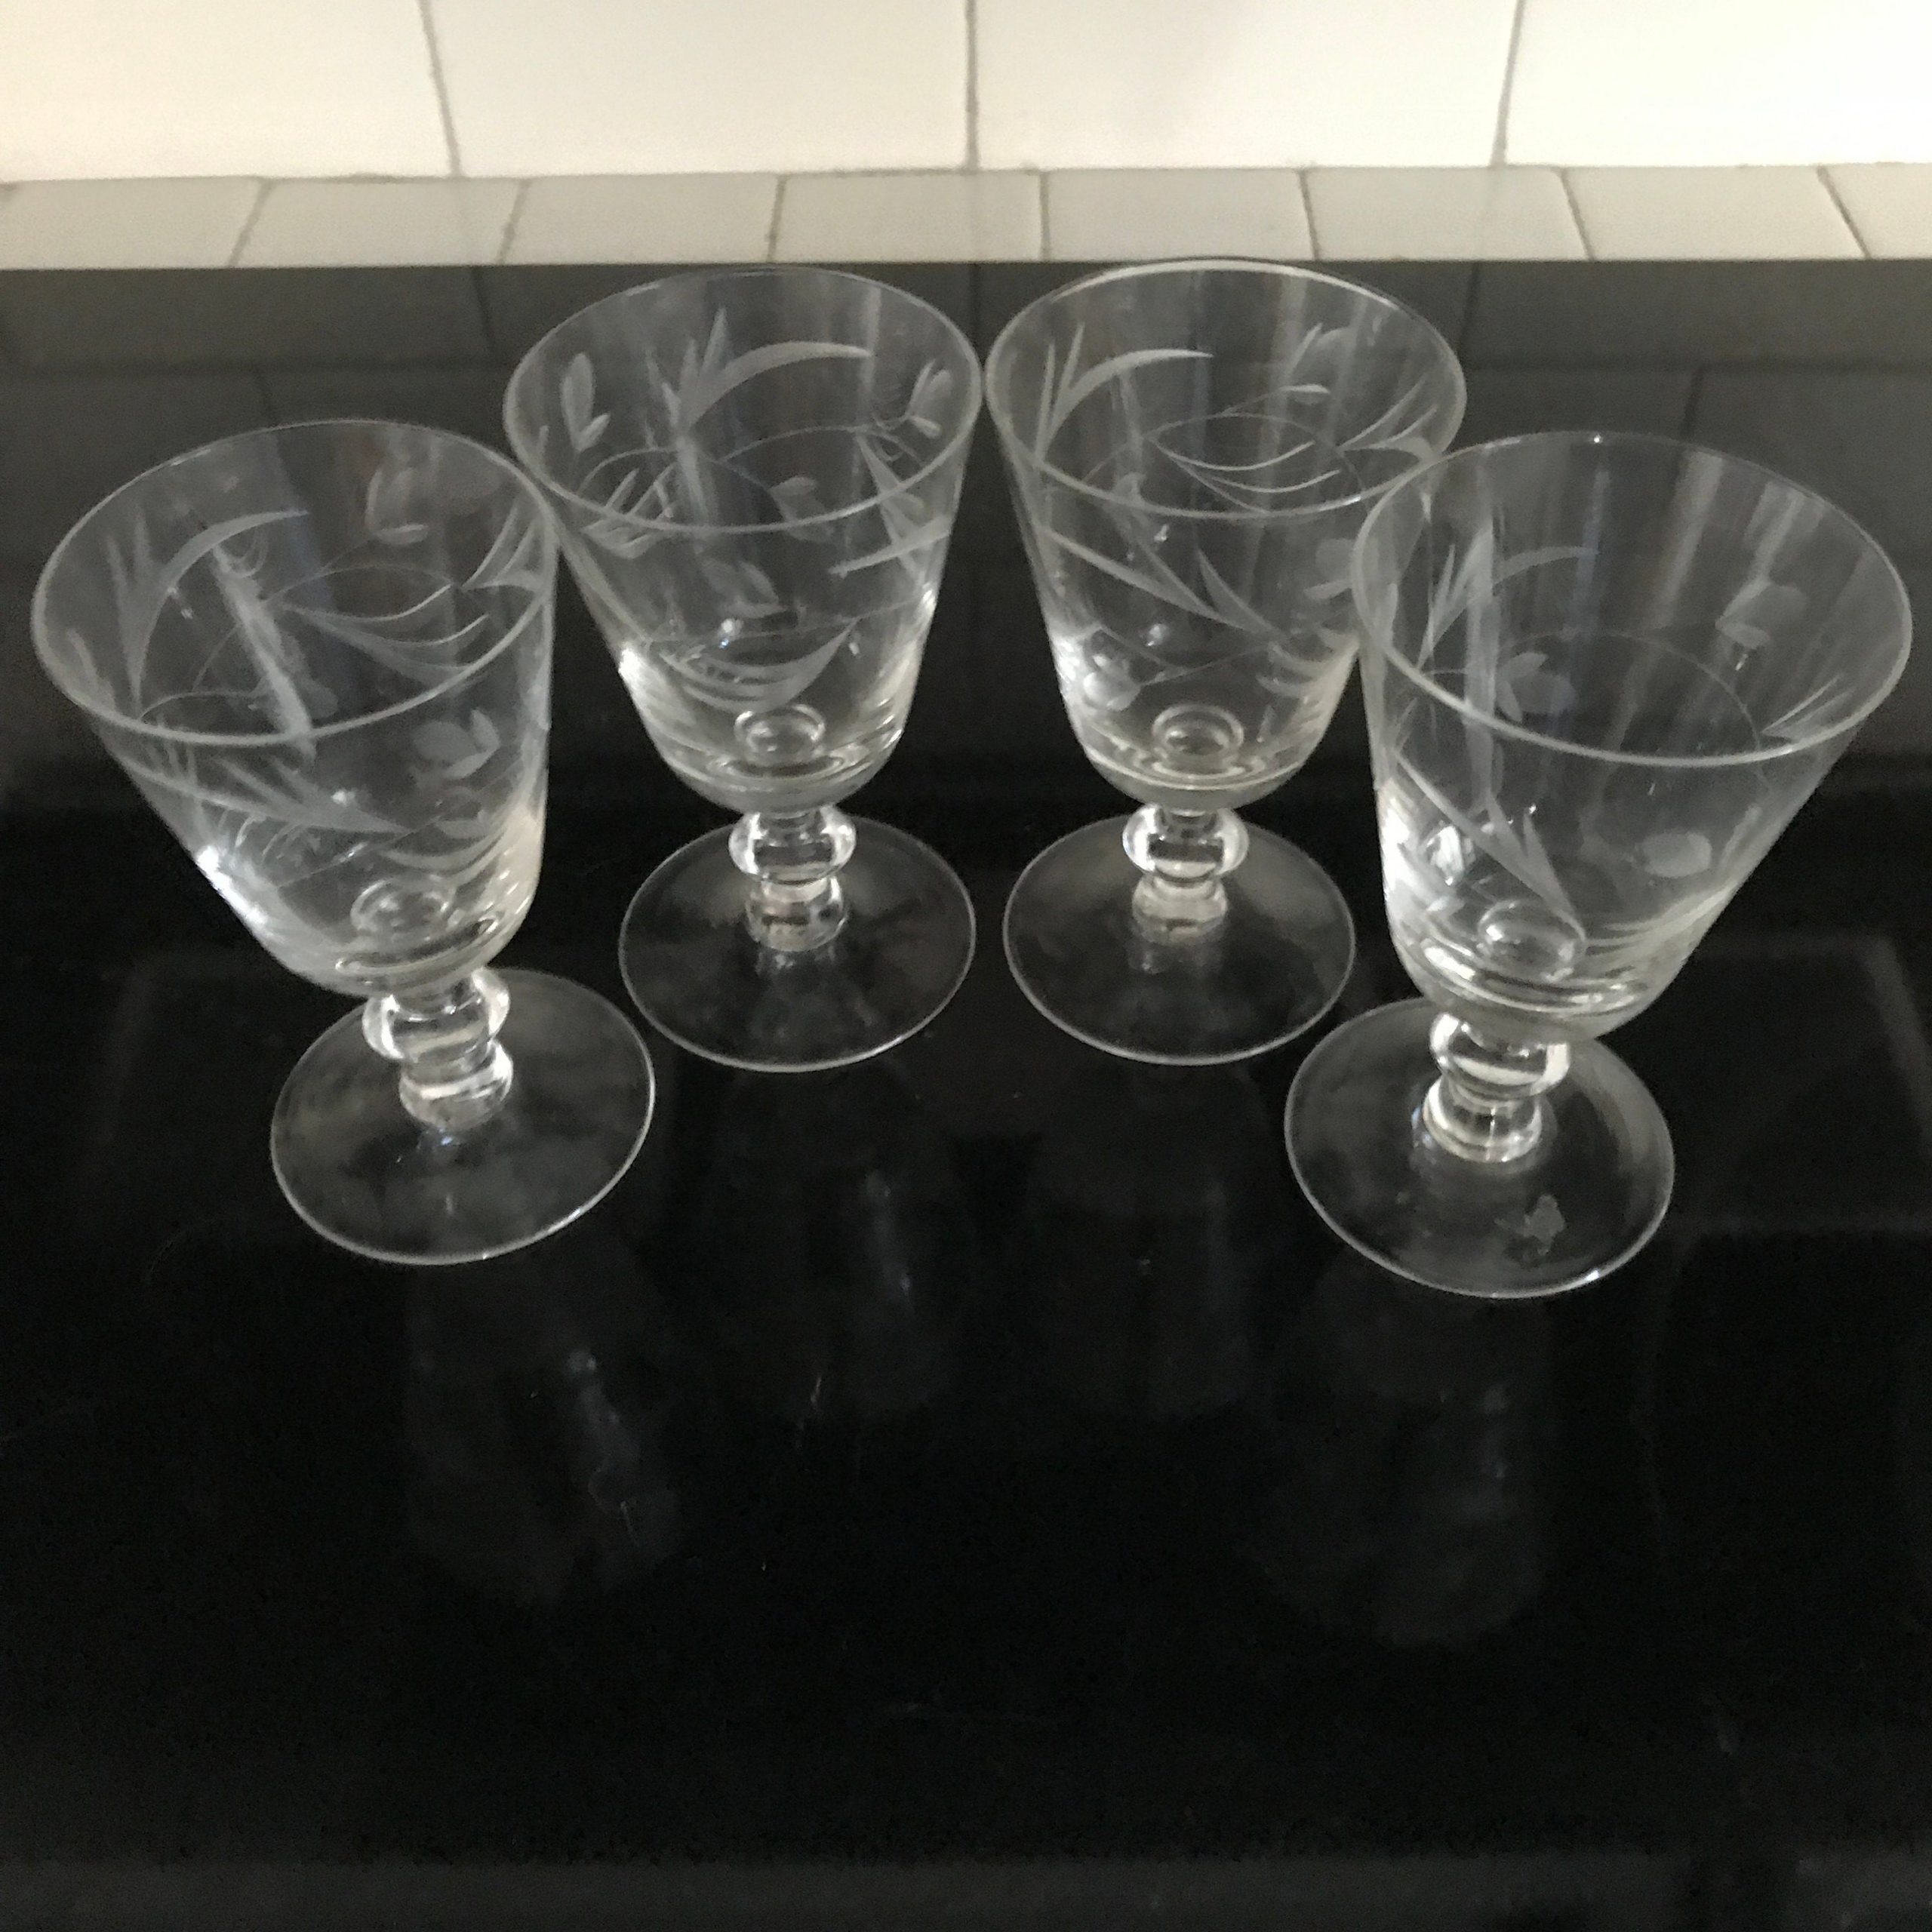 https://www.truevintageantiques.com/wp-content/uploads/2020/02/antique-etched-crystal-goblets-wine-water-short-stem-collectible-set-of-4-farmhouse-display-cottage-elegant-dining-5e5730a91-scaled.jpg